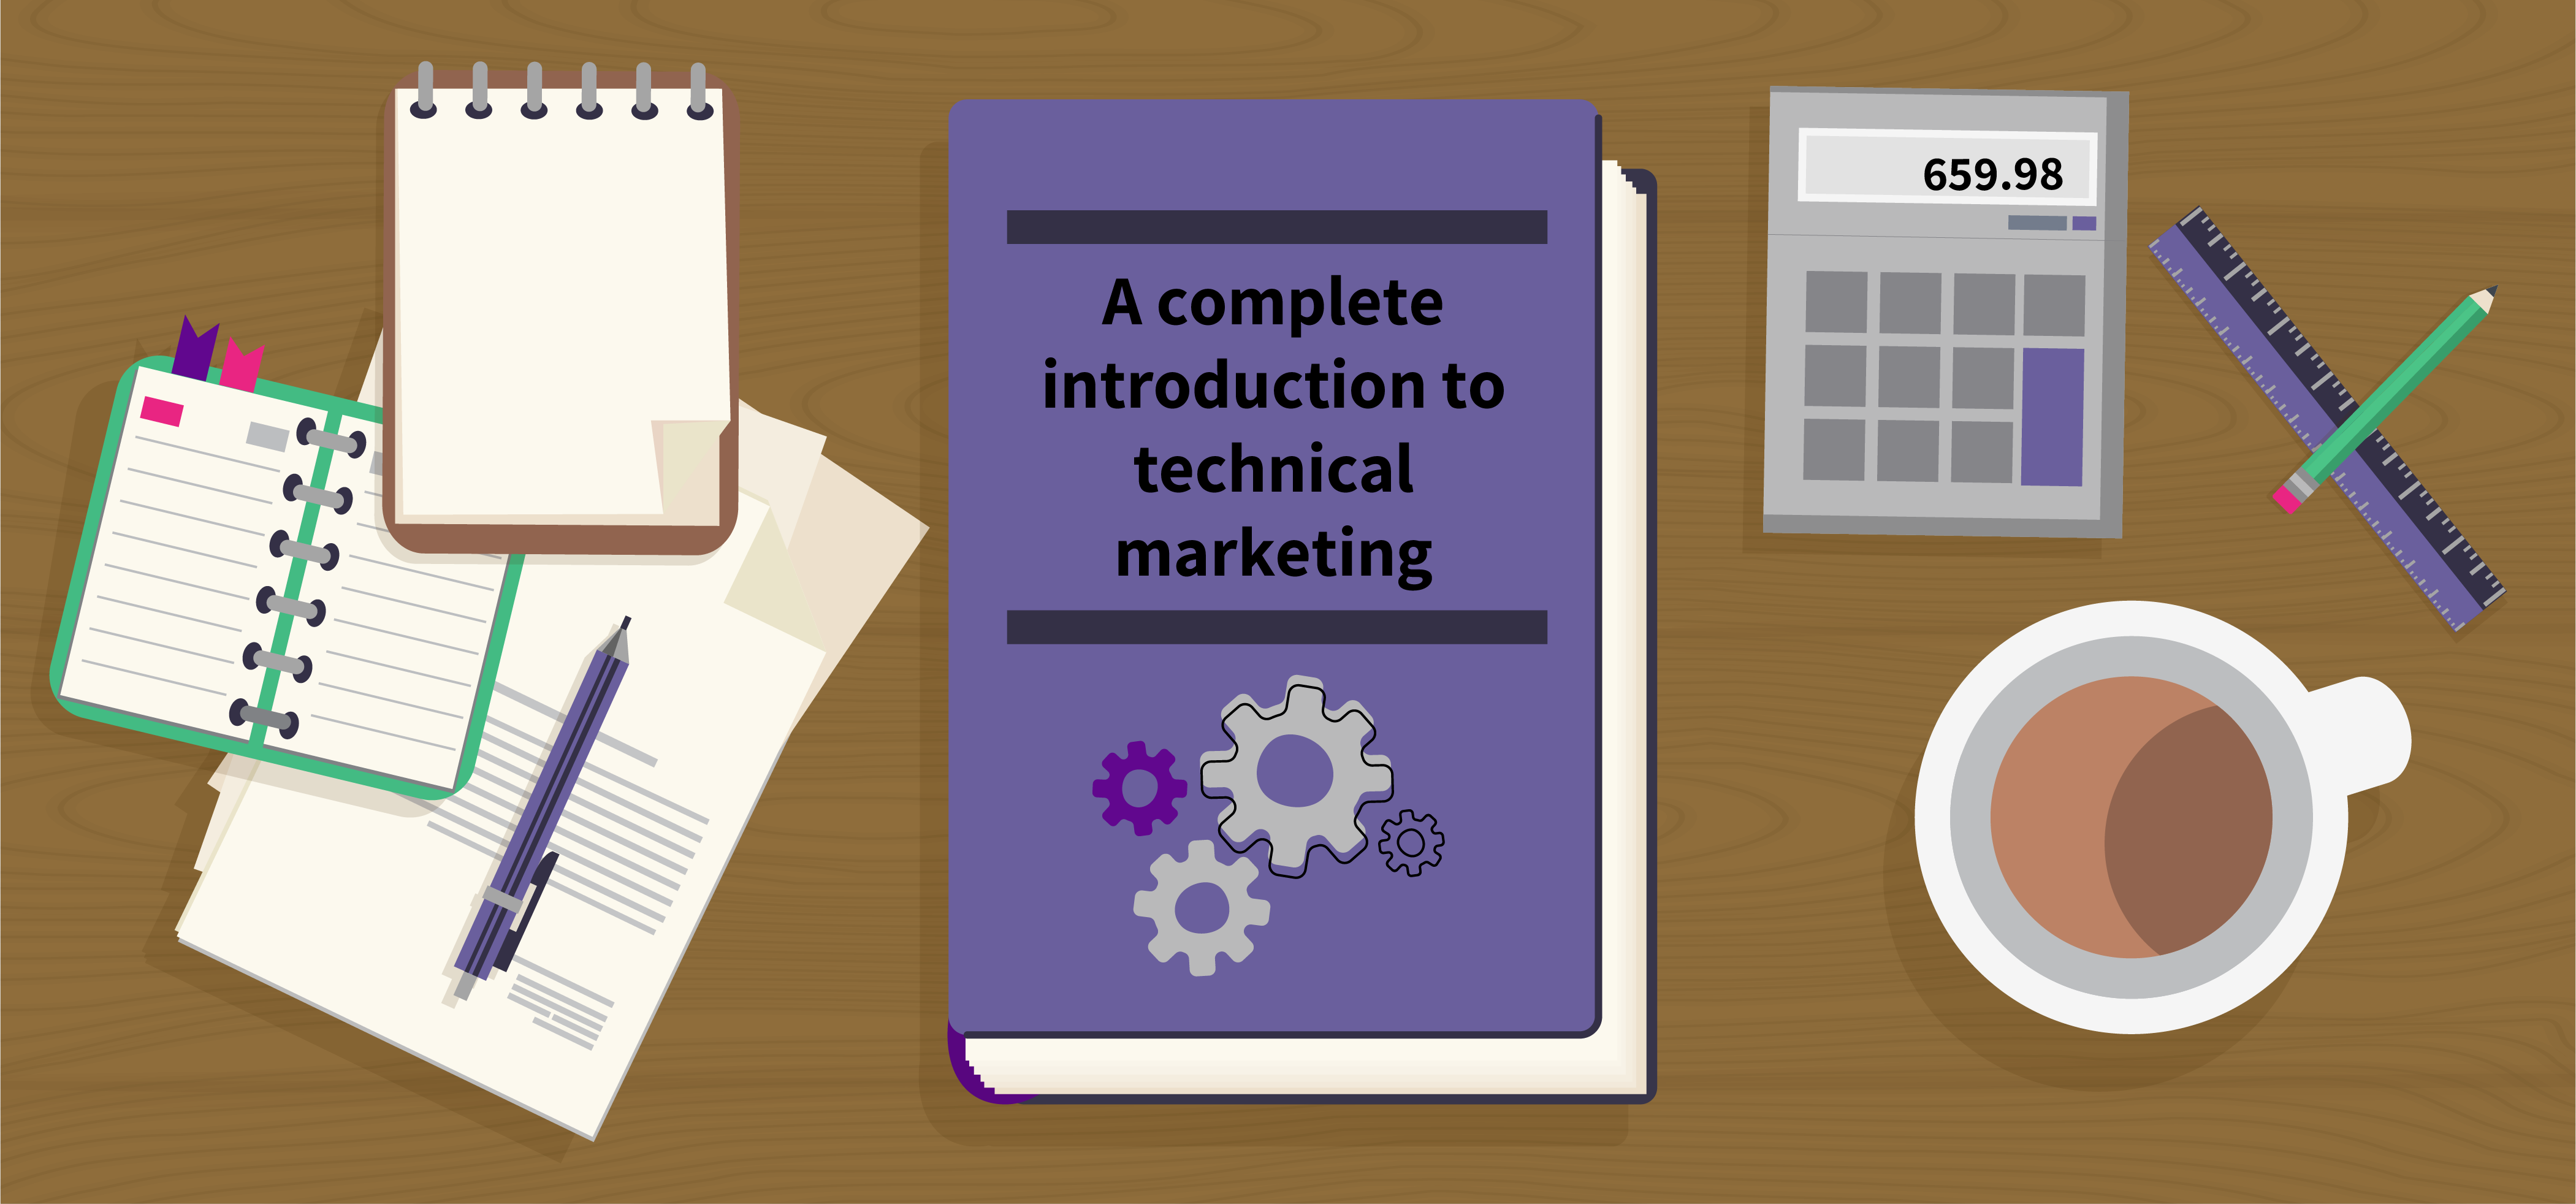 Lead image for A Complete Introduction to Technical Marketing